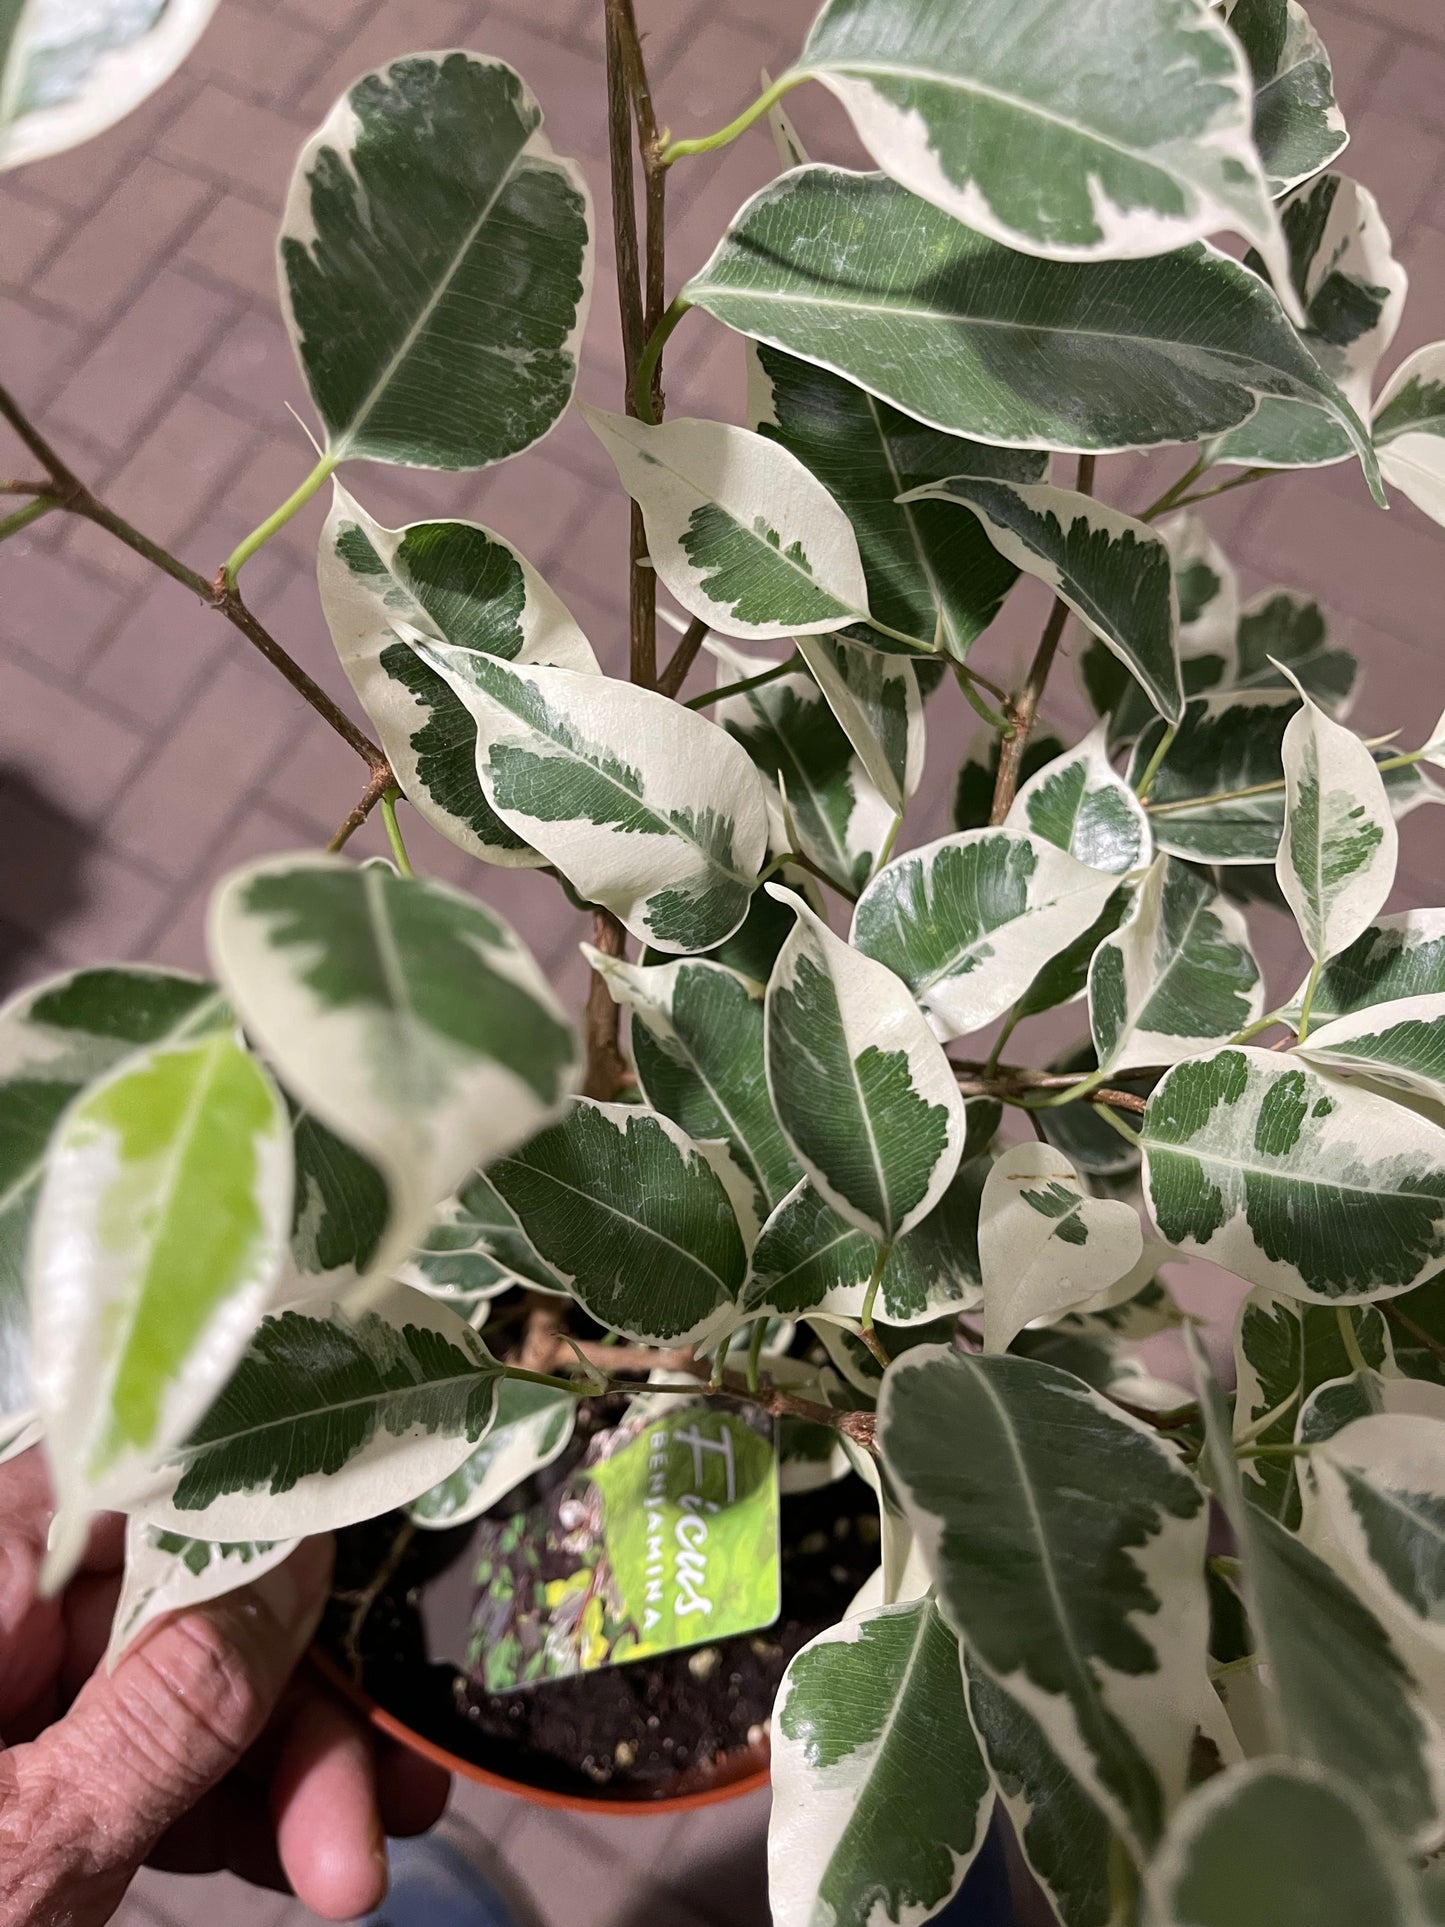 Ficus Benjamina 6  “ growing pot (assorted color green/light green/white and green